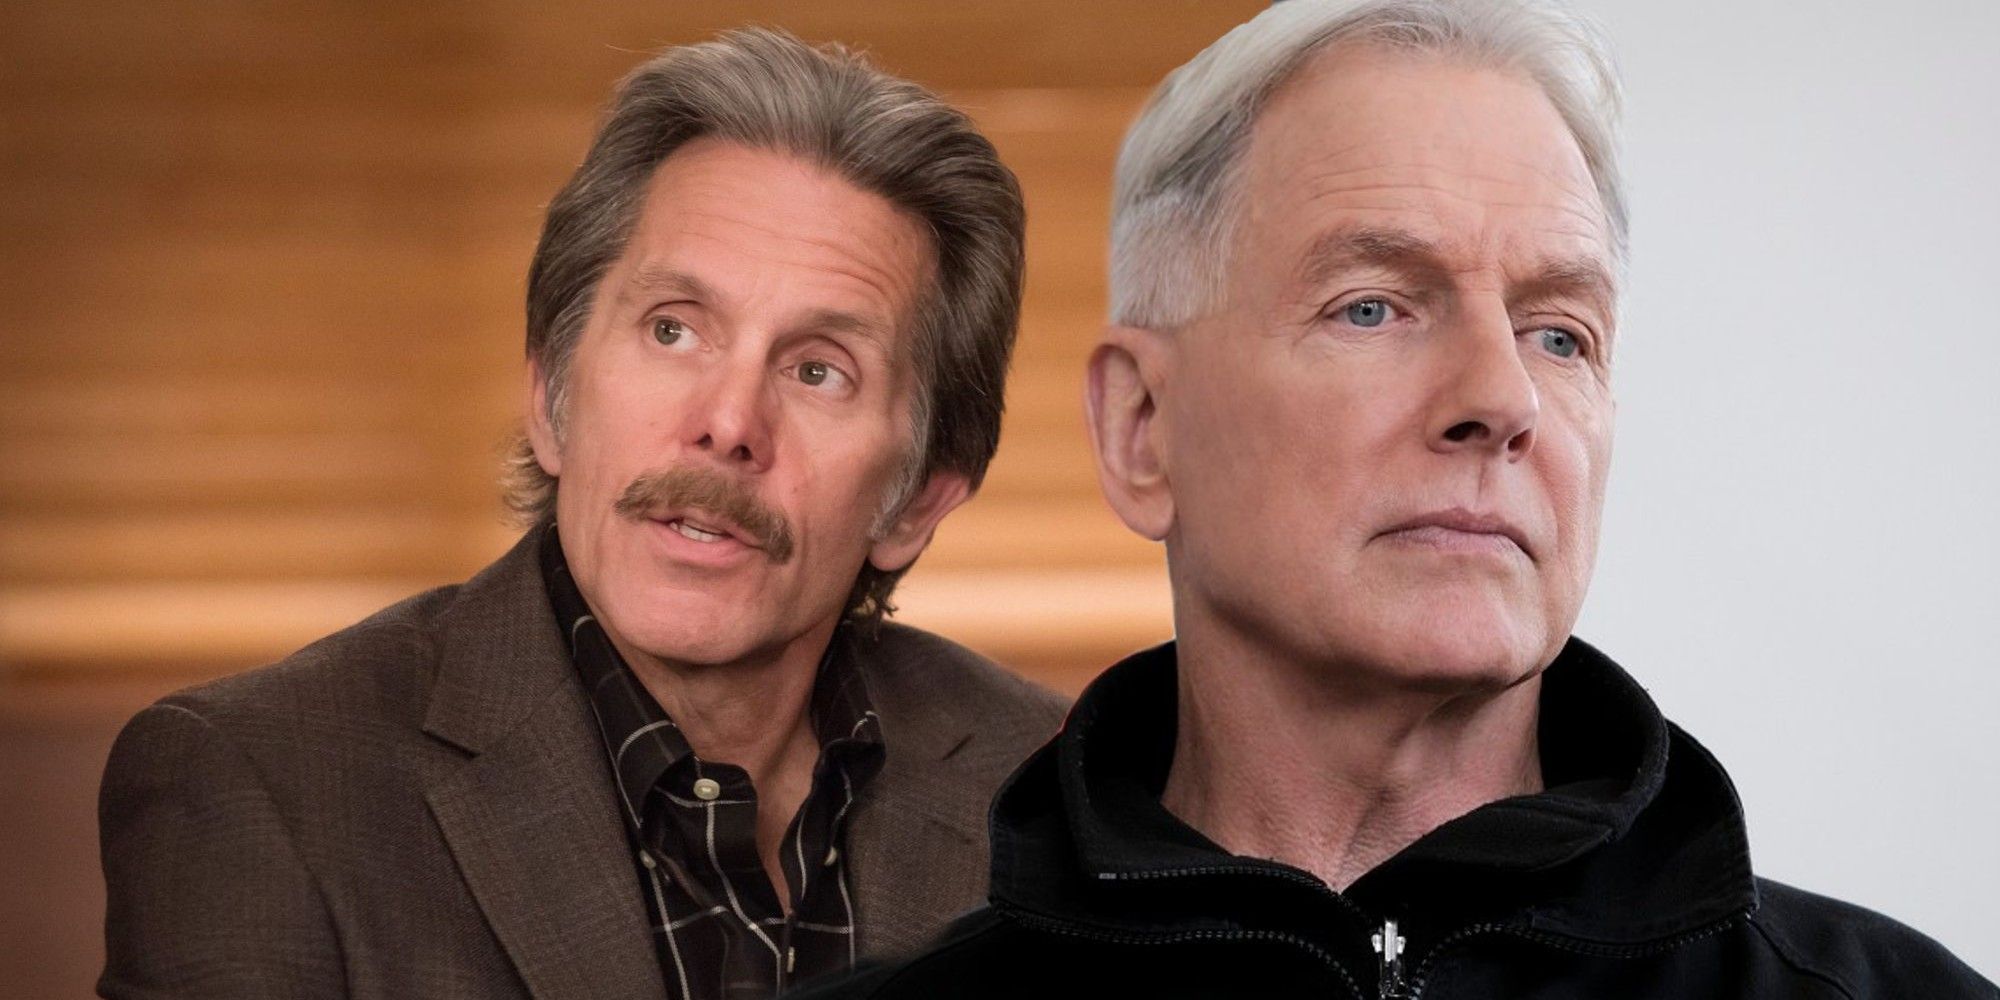 NCIS Season 19 Reportedly Looking To Cast Gary Cole In Major Role